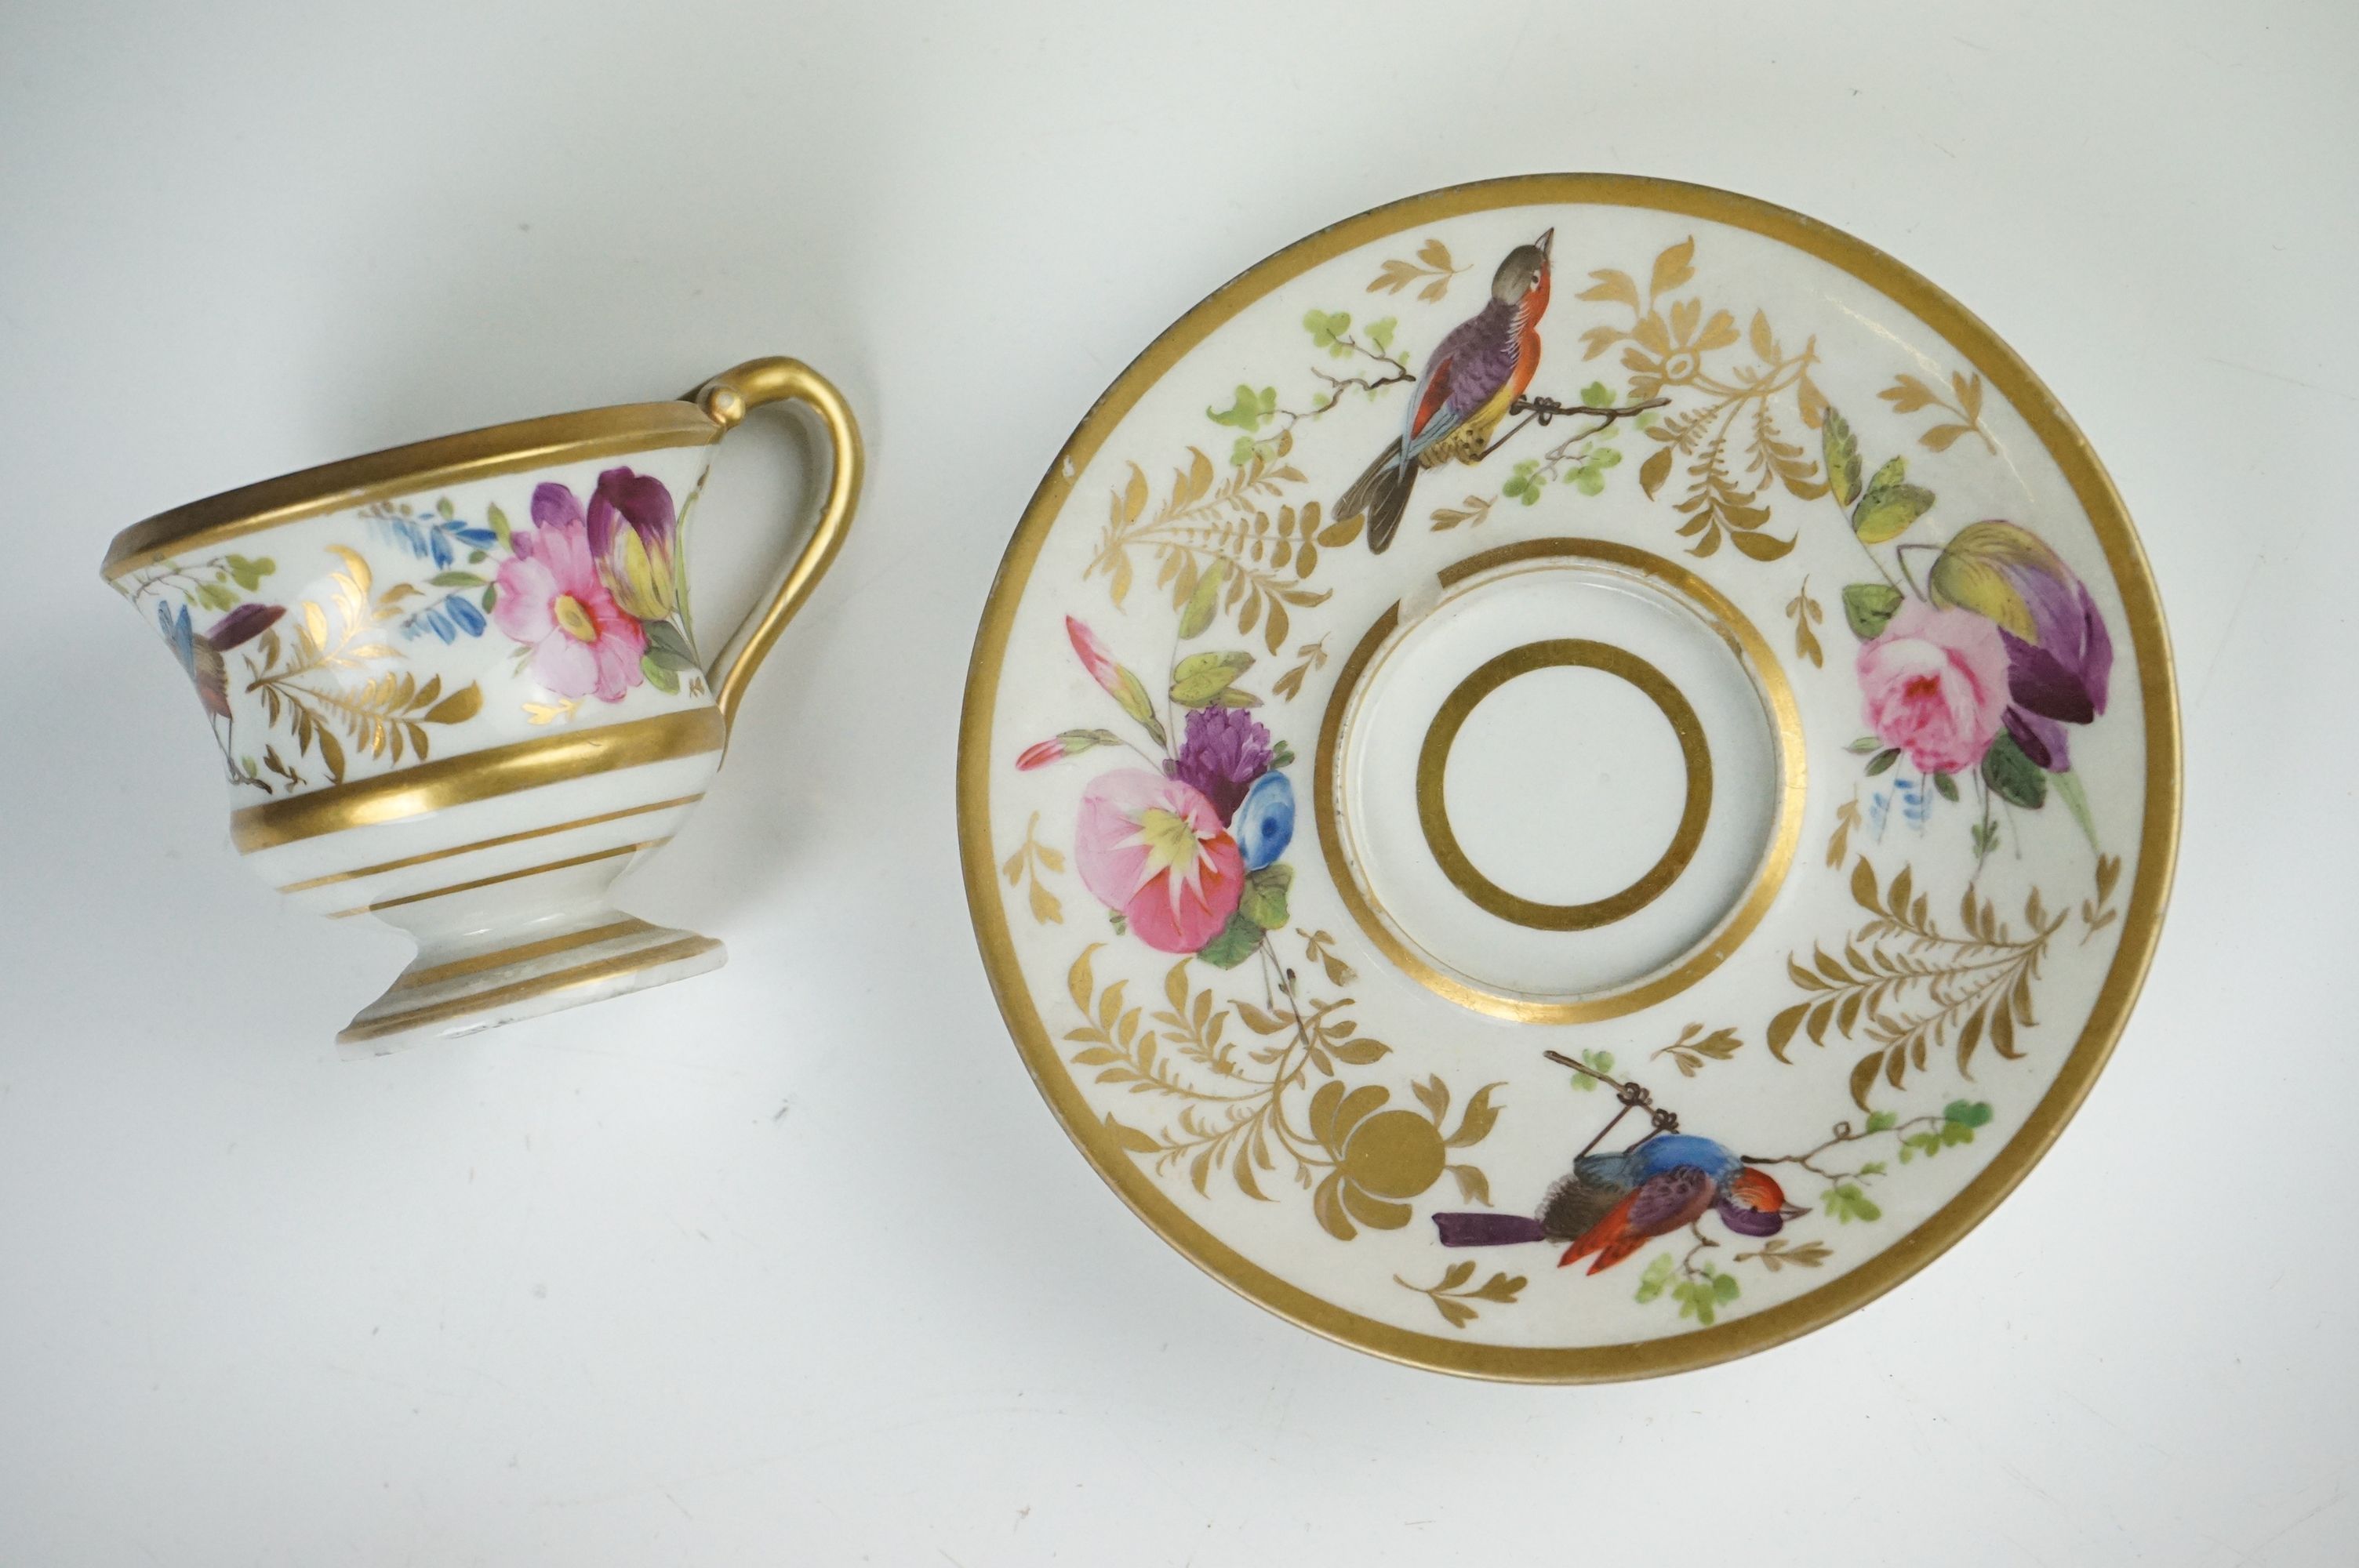 Pair of Continental Porcelain Cabinet Cups and Saucers decorated in gilt and enamels with flowers - Image 5 of 8